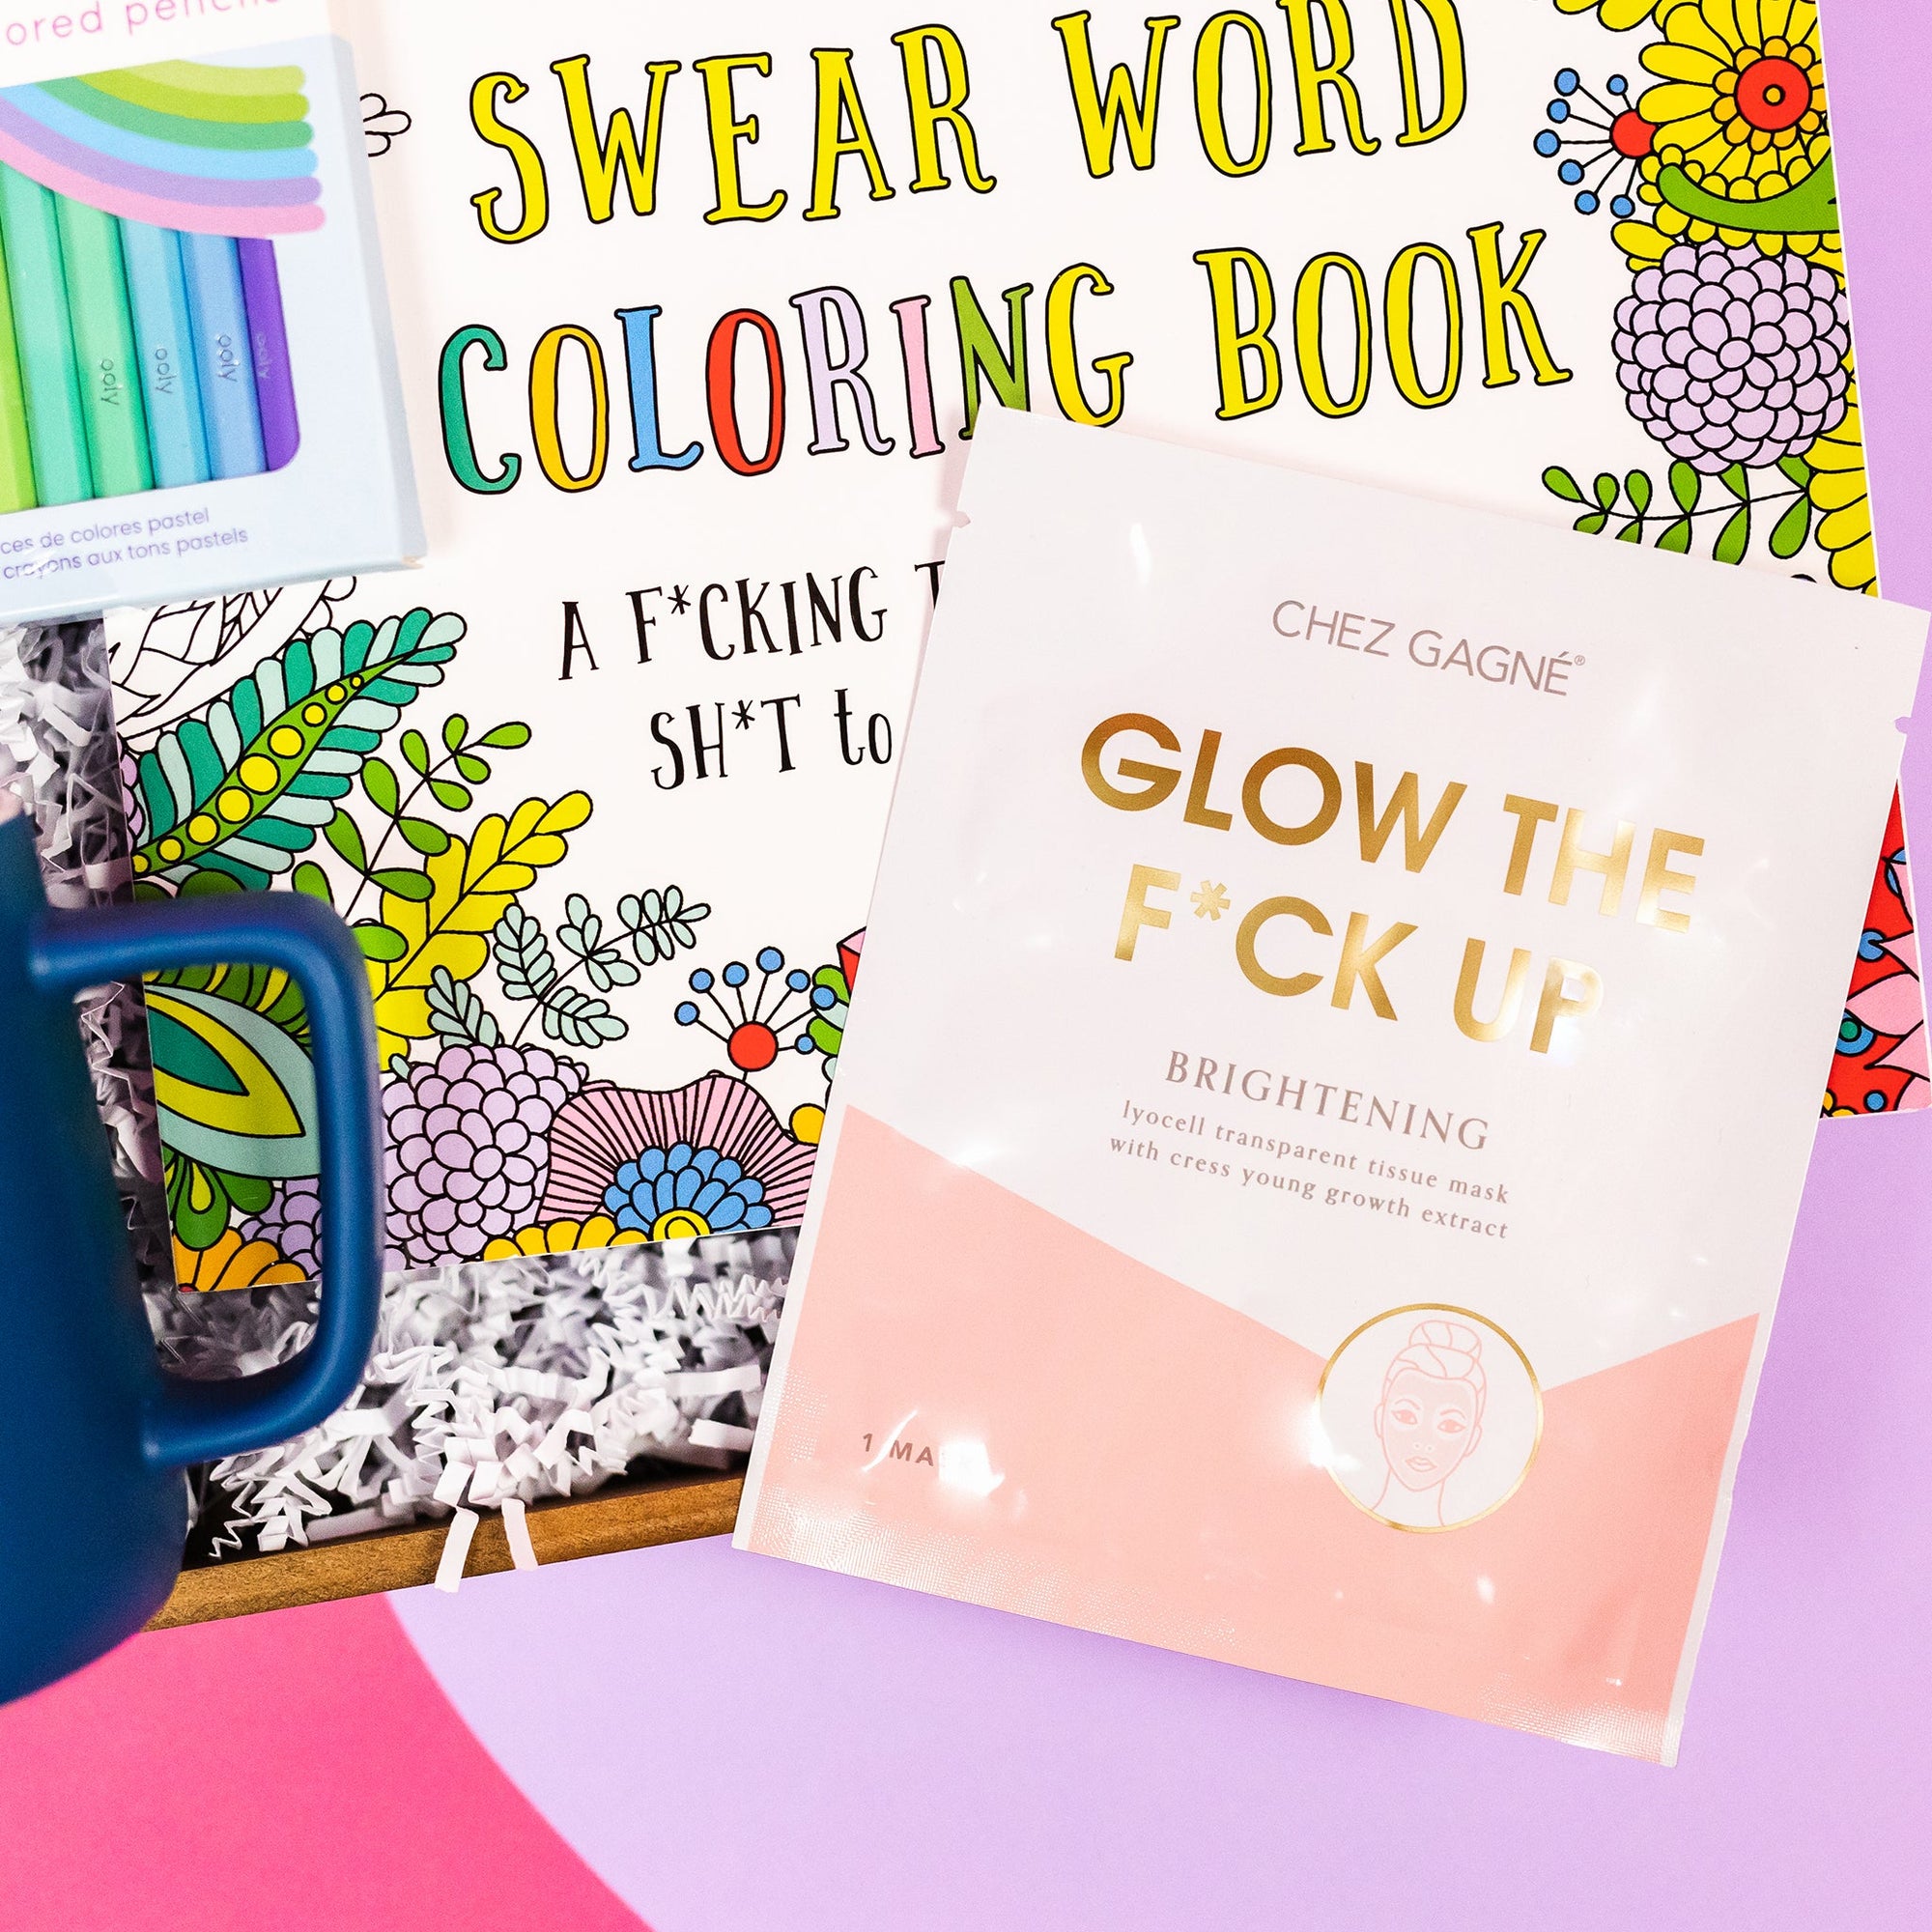 On a bright pink and purple background, a handful of optimistic, brightly colored swear-themed gifts are arranged on a tray among white crinkle. The photo is a close-up of the Chez Gagne Glow the Fuck Up Brightening face mask in a white and blush package with gold writing.